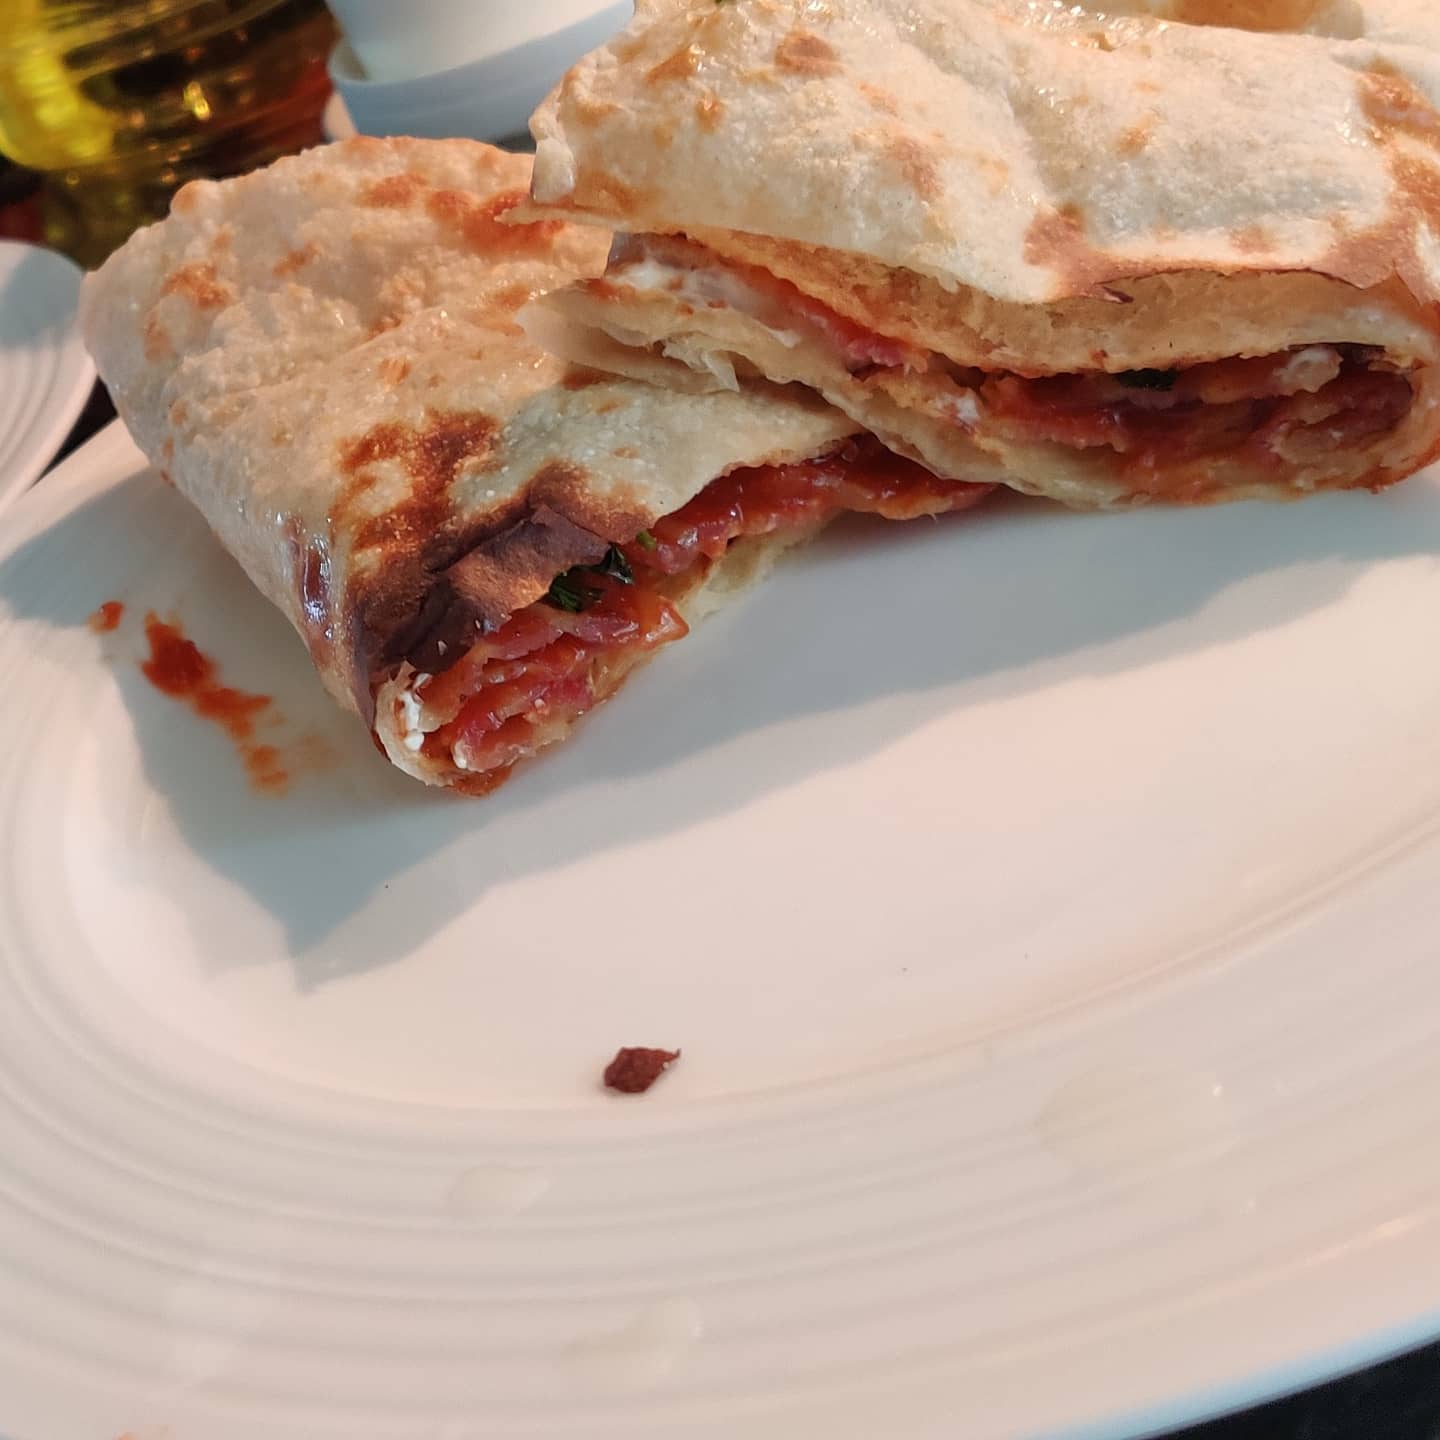 Sorry, more food stuff - this is to send my condolences to anyone NOT having a lovely @dishoom Bacon Naan Roll make-at-home kit right now (birthday treat from @hannahcot!). It is the tastiest thing ever, and I urge everyone to order one immediately. #omnomnom